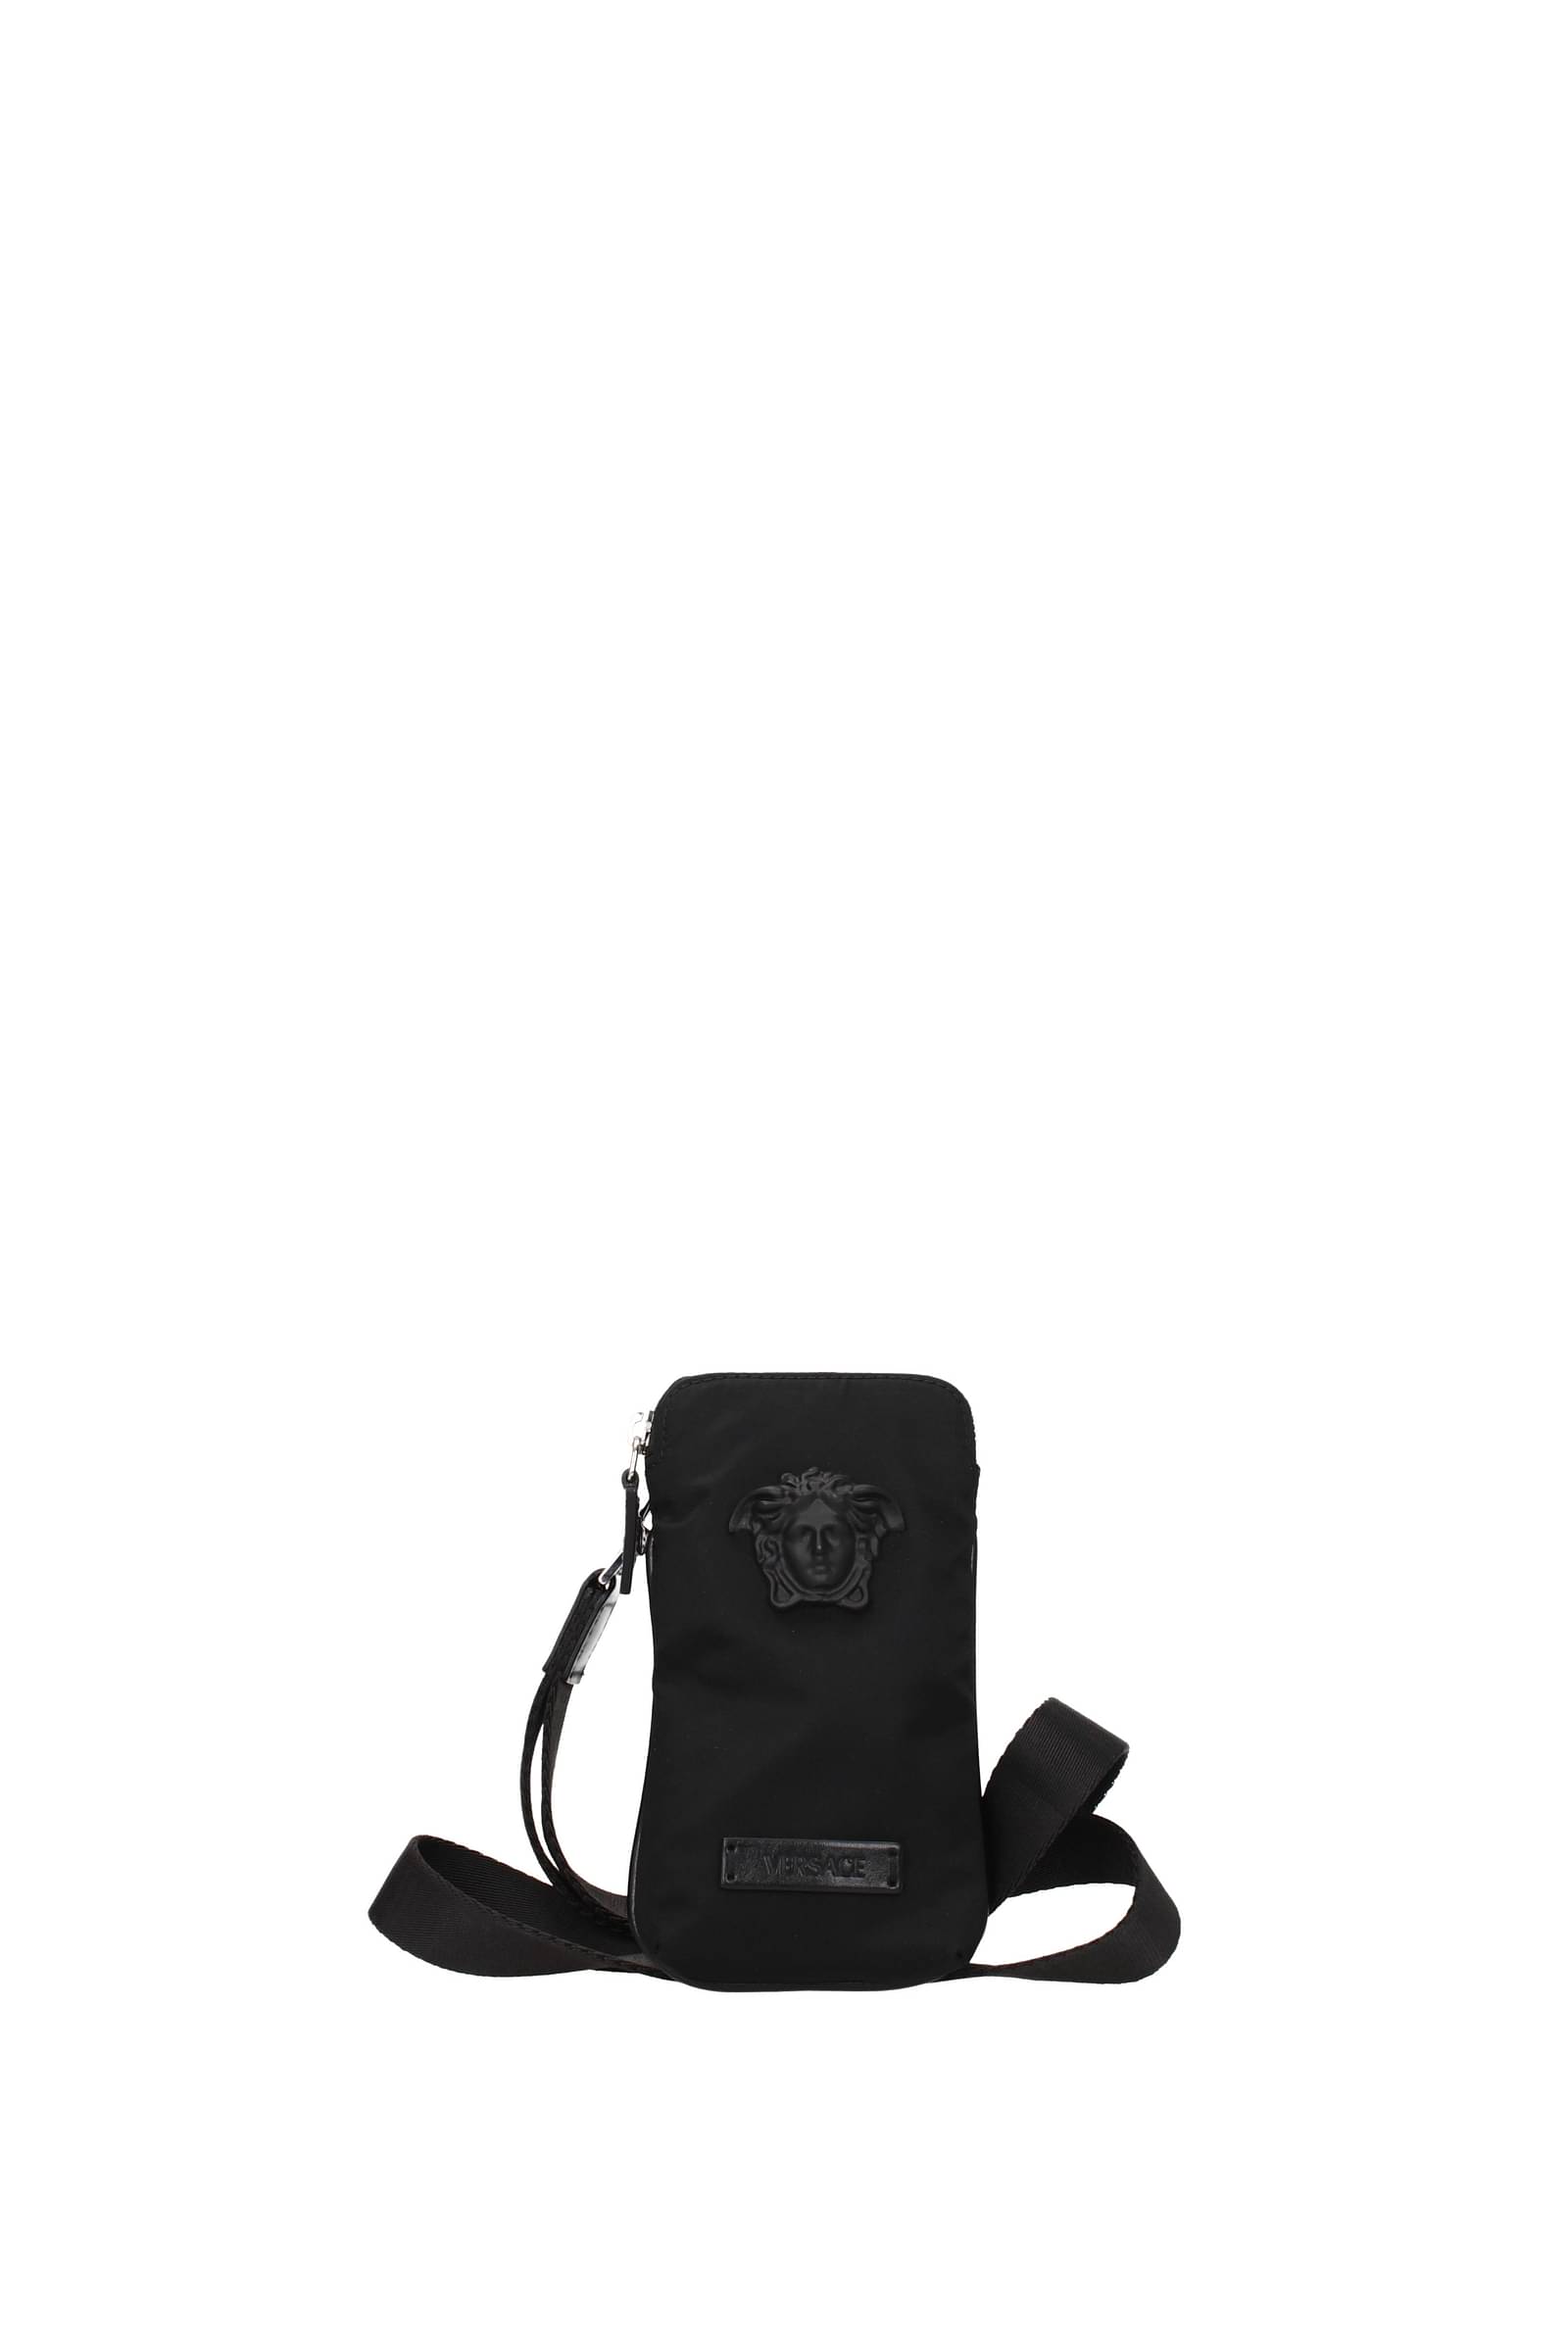 Versace Men's Messenger Bags - Bags | Stylicy USA